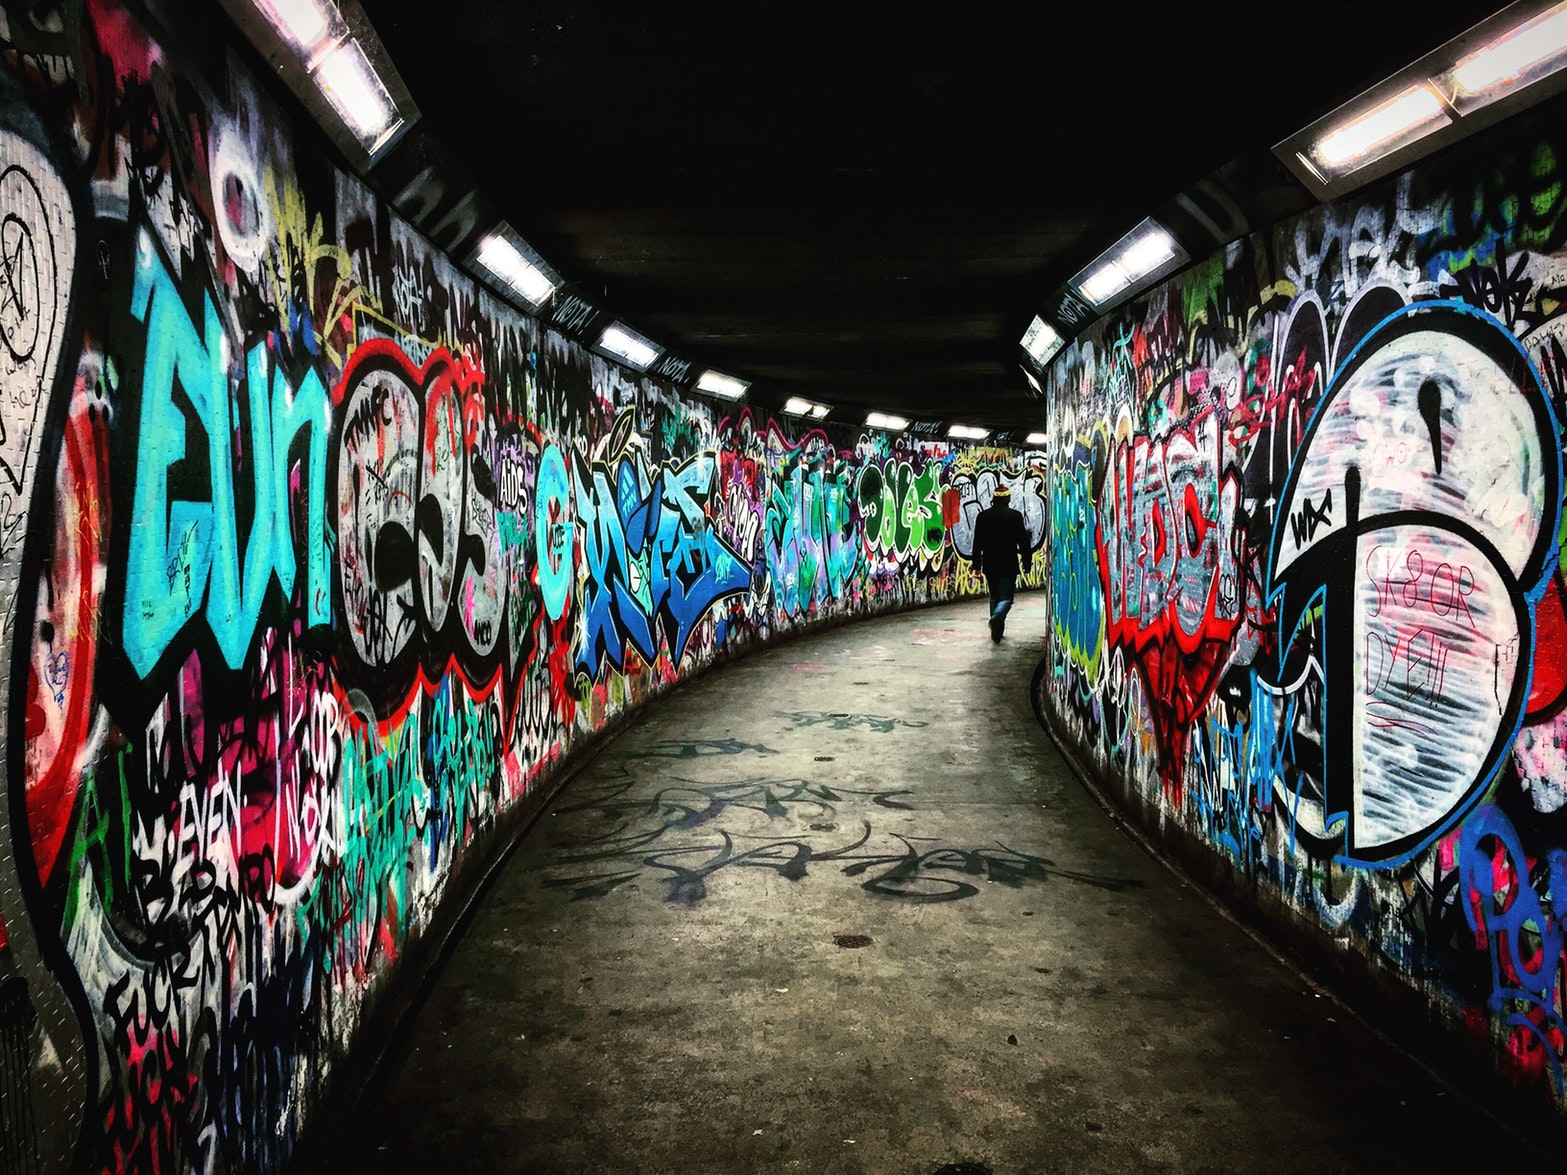 Man walking in tunnel with graffiti on the walls.